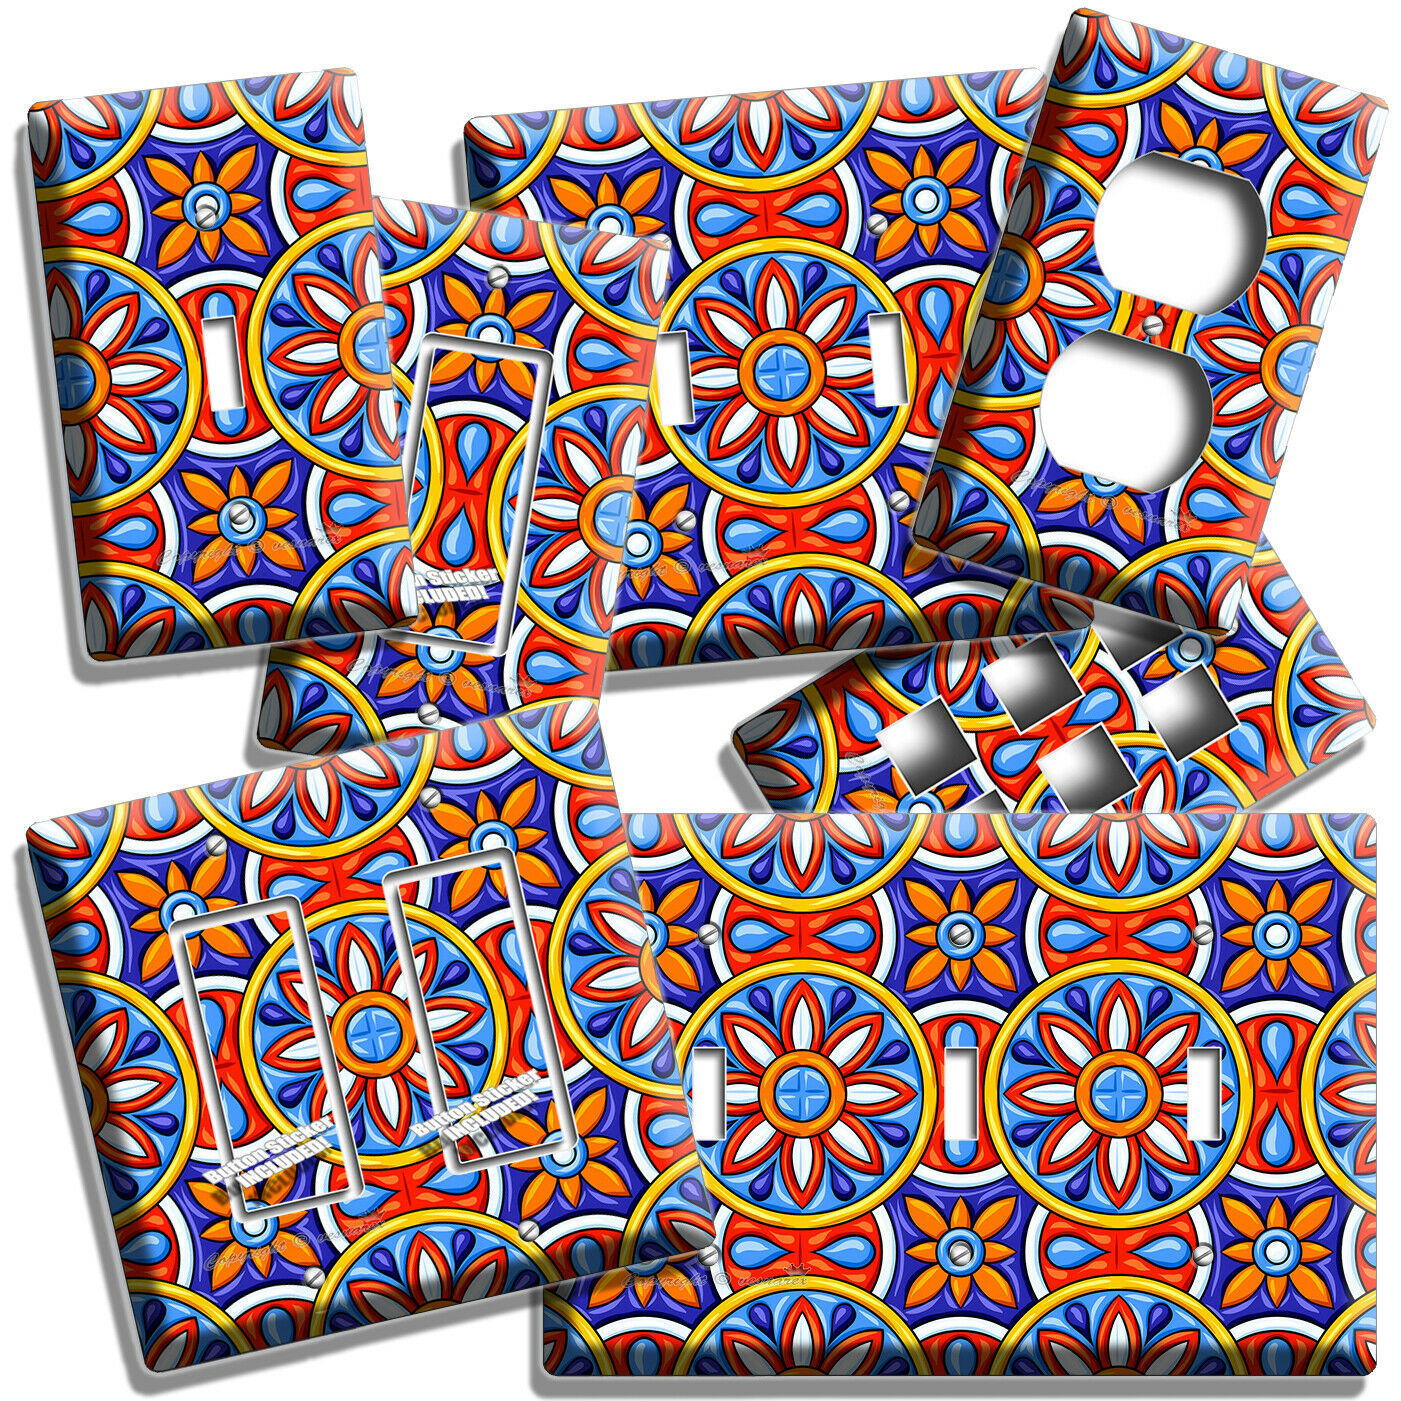 MEXICAN TALAVERA TILE LOOK LIGHT SWITCH OUTLET PLATE KITCHEN FOLK ART ROOM DECOR - $17.09 - $27.54